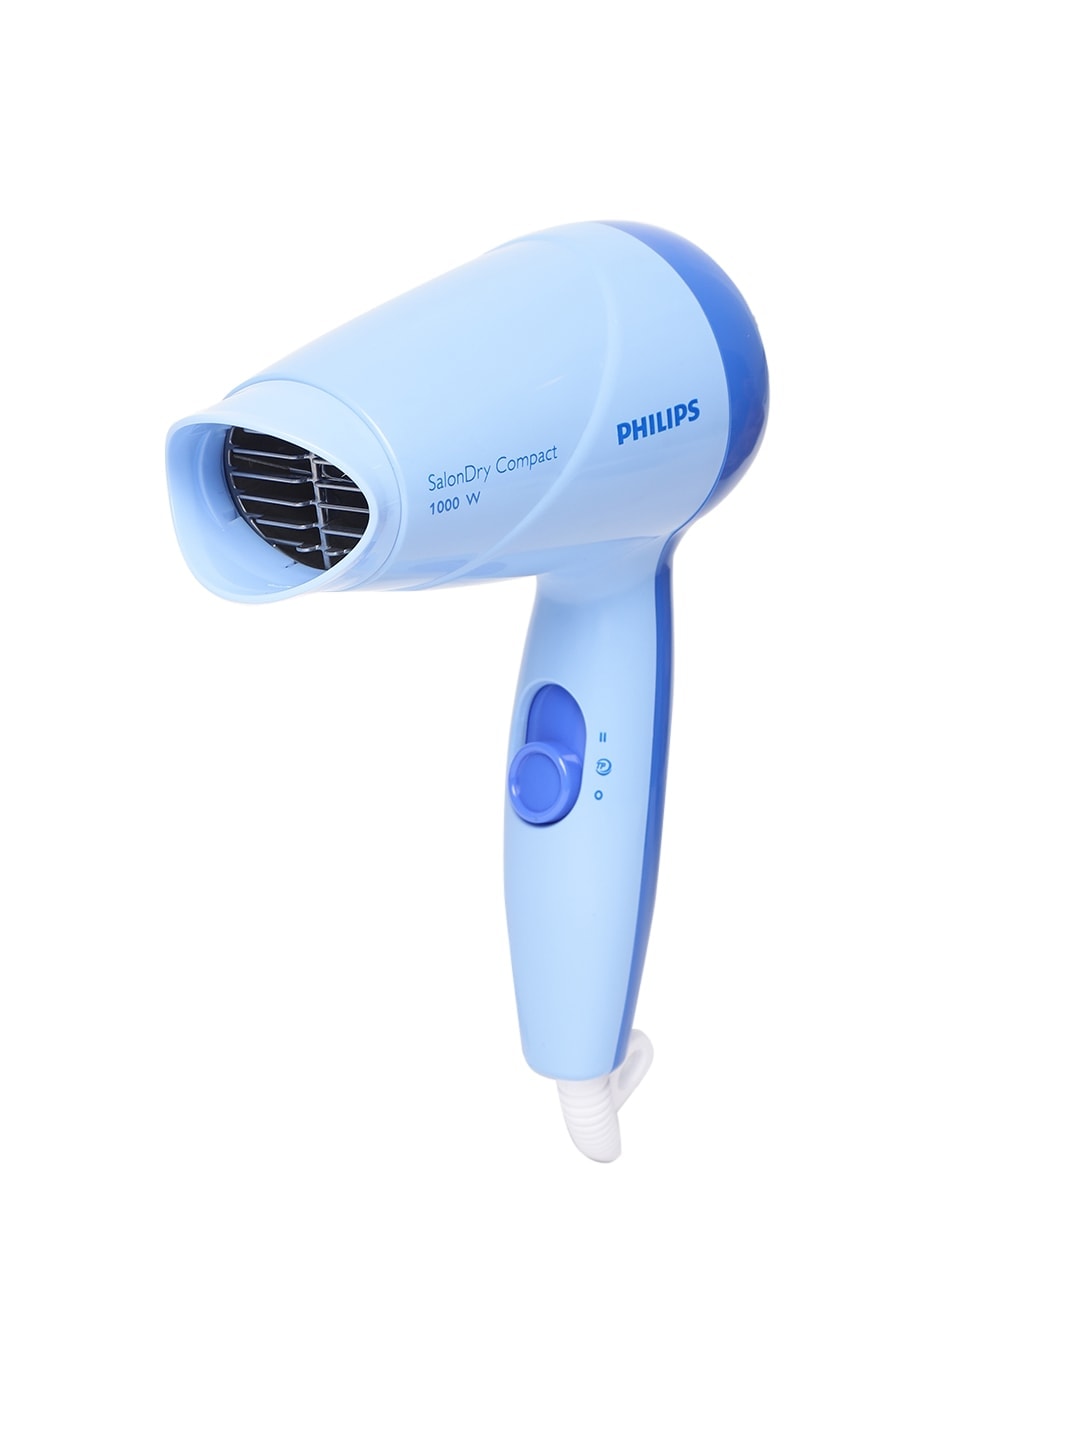 Philips HP8100/60 SalonDry ThermoProtect 1000W Compact Hair Dryer - Blue Price in India